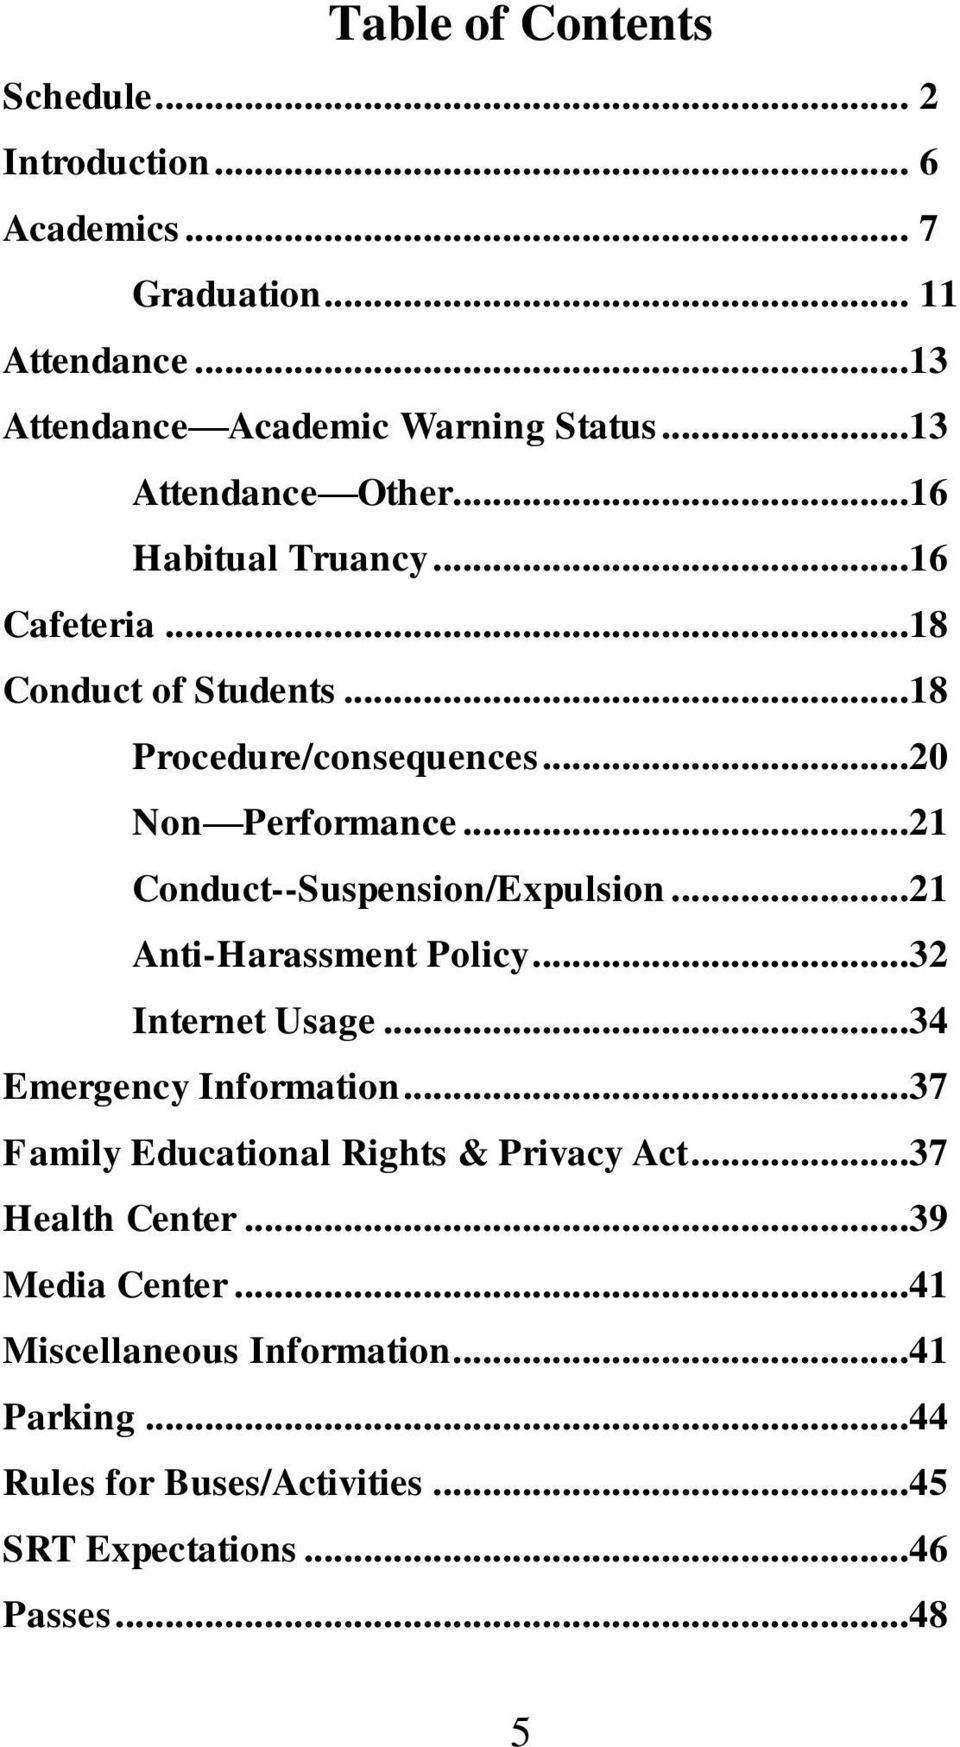 ..21 Conduct--Suspension/Expulsion...21 Anti-Harassment Policy...32 Internet Usage...34 Emergency Information.